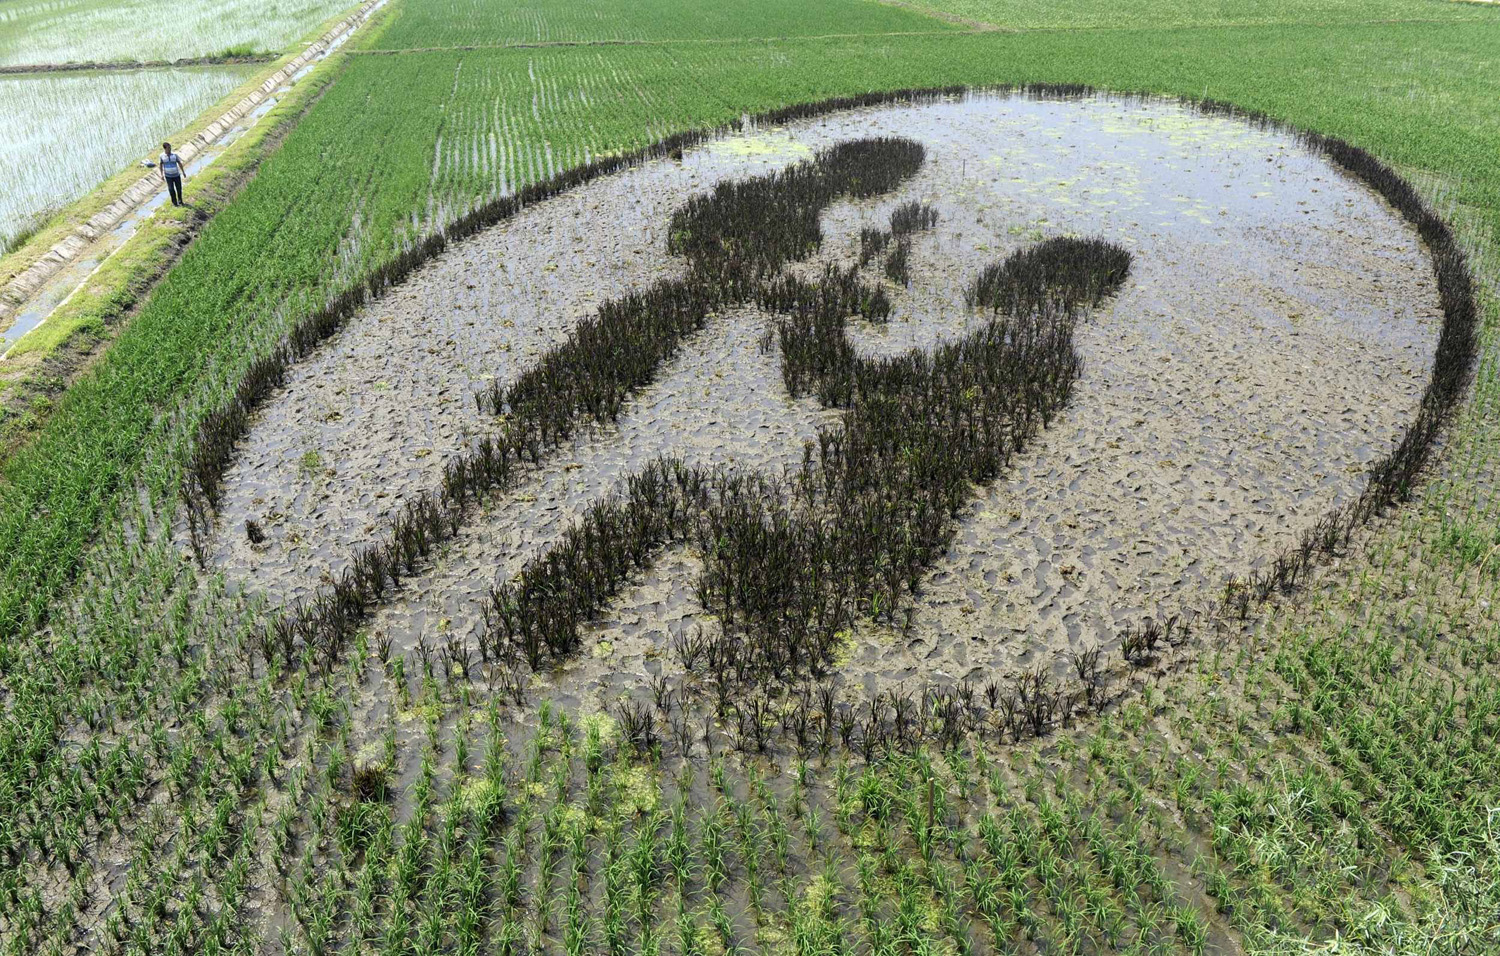 A man walks by a mural made of rice plants at a paddy field in Shenyang, Liaoning province